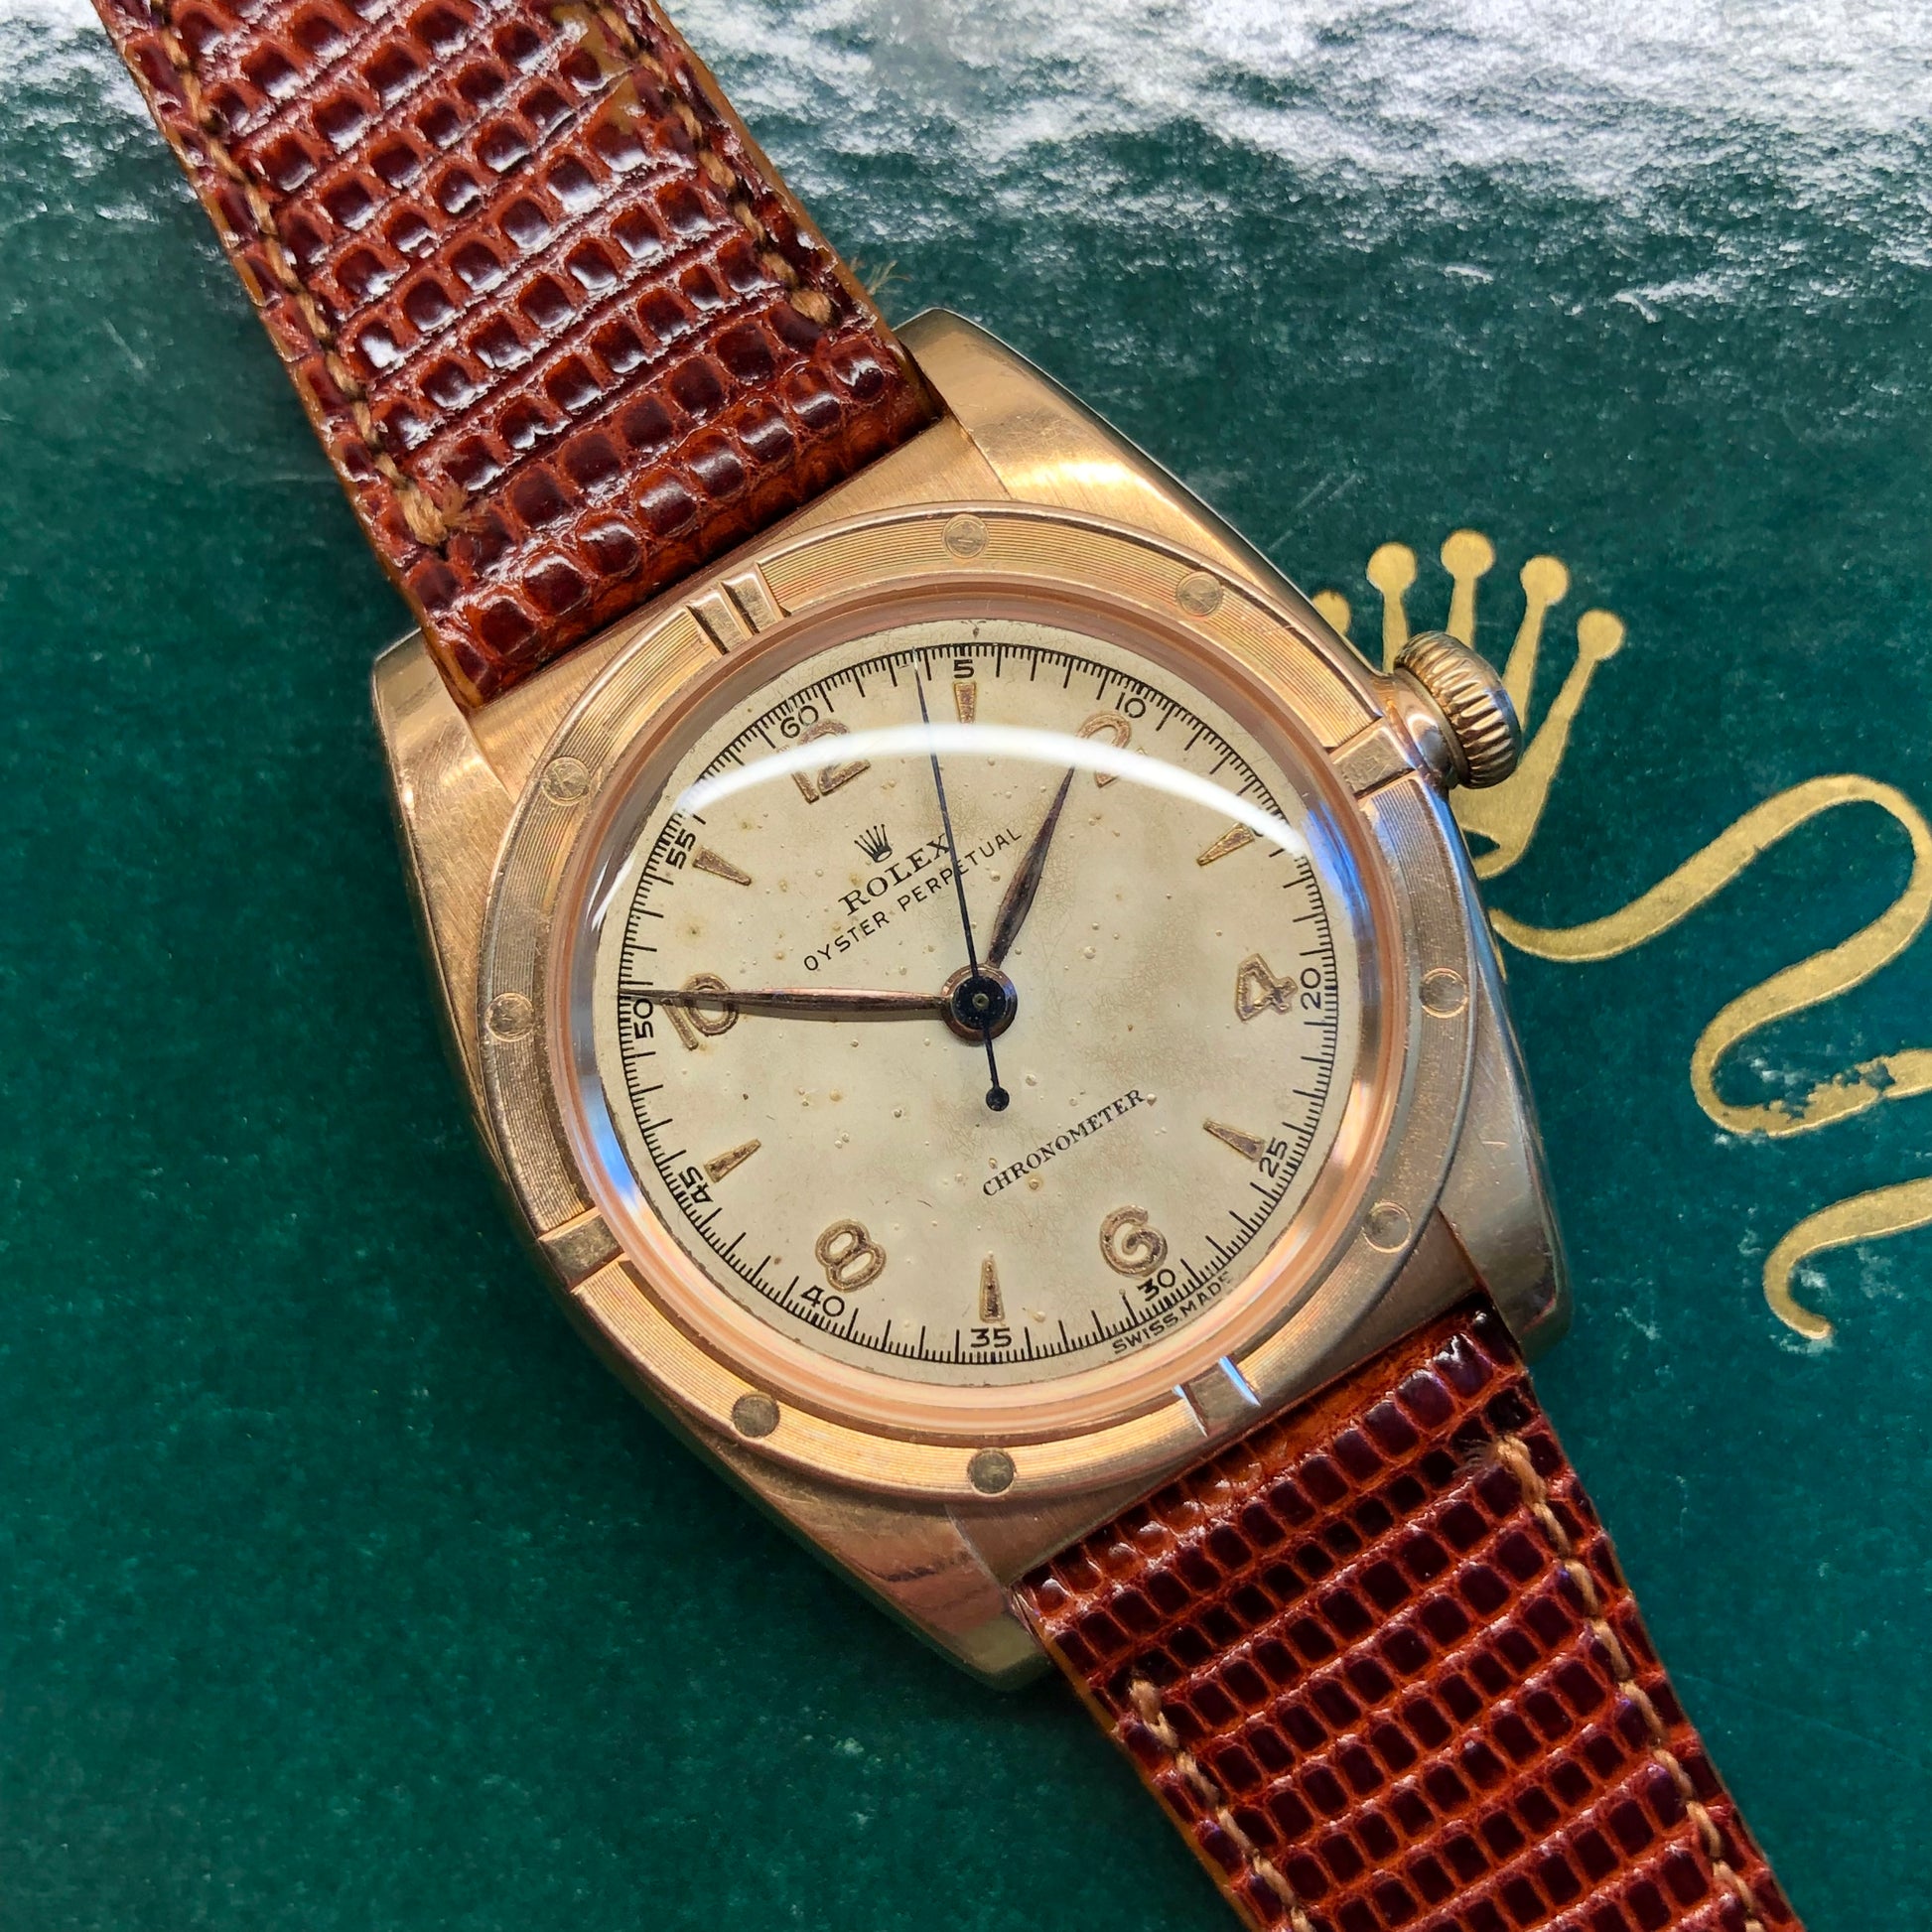 Creep Beliggenhed appetit 1946 Rolex Oyster Perpetual Bubbleback 3372 Chronometer 14K Rose Gold  Automatic Wristwatch | HashtagWatchCo